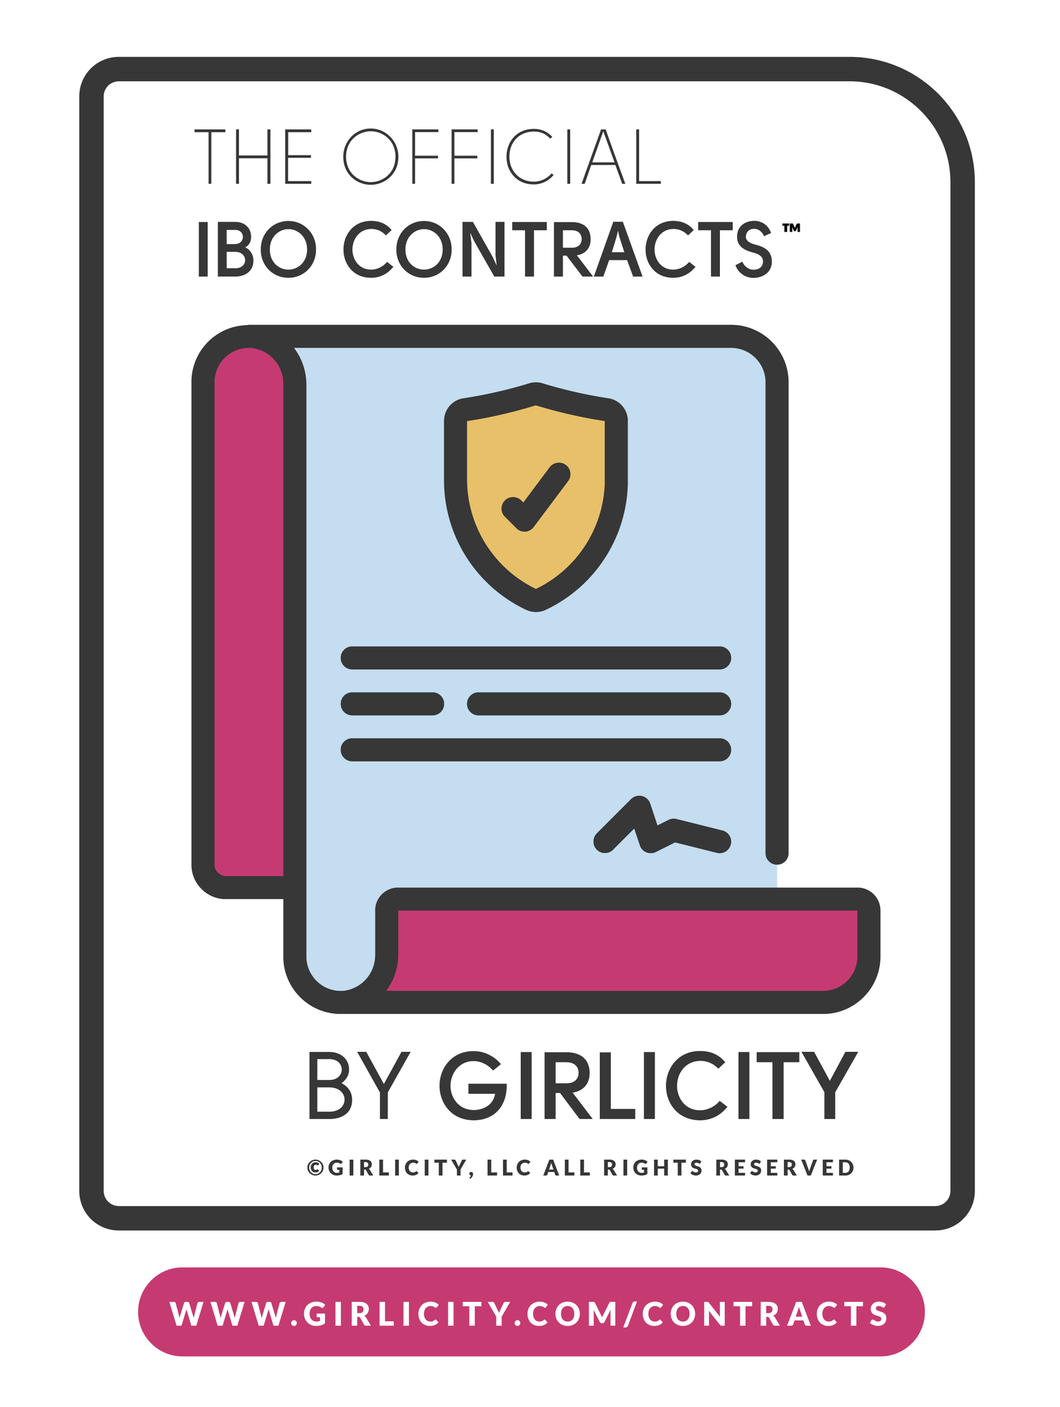 IBO Service Partner Contracts by Girlicity